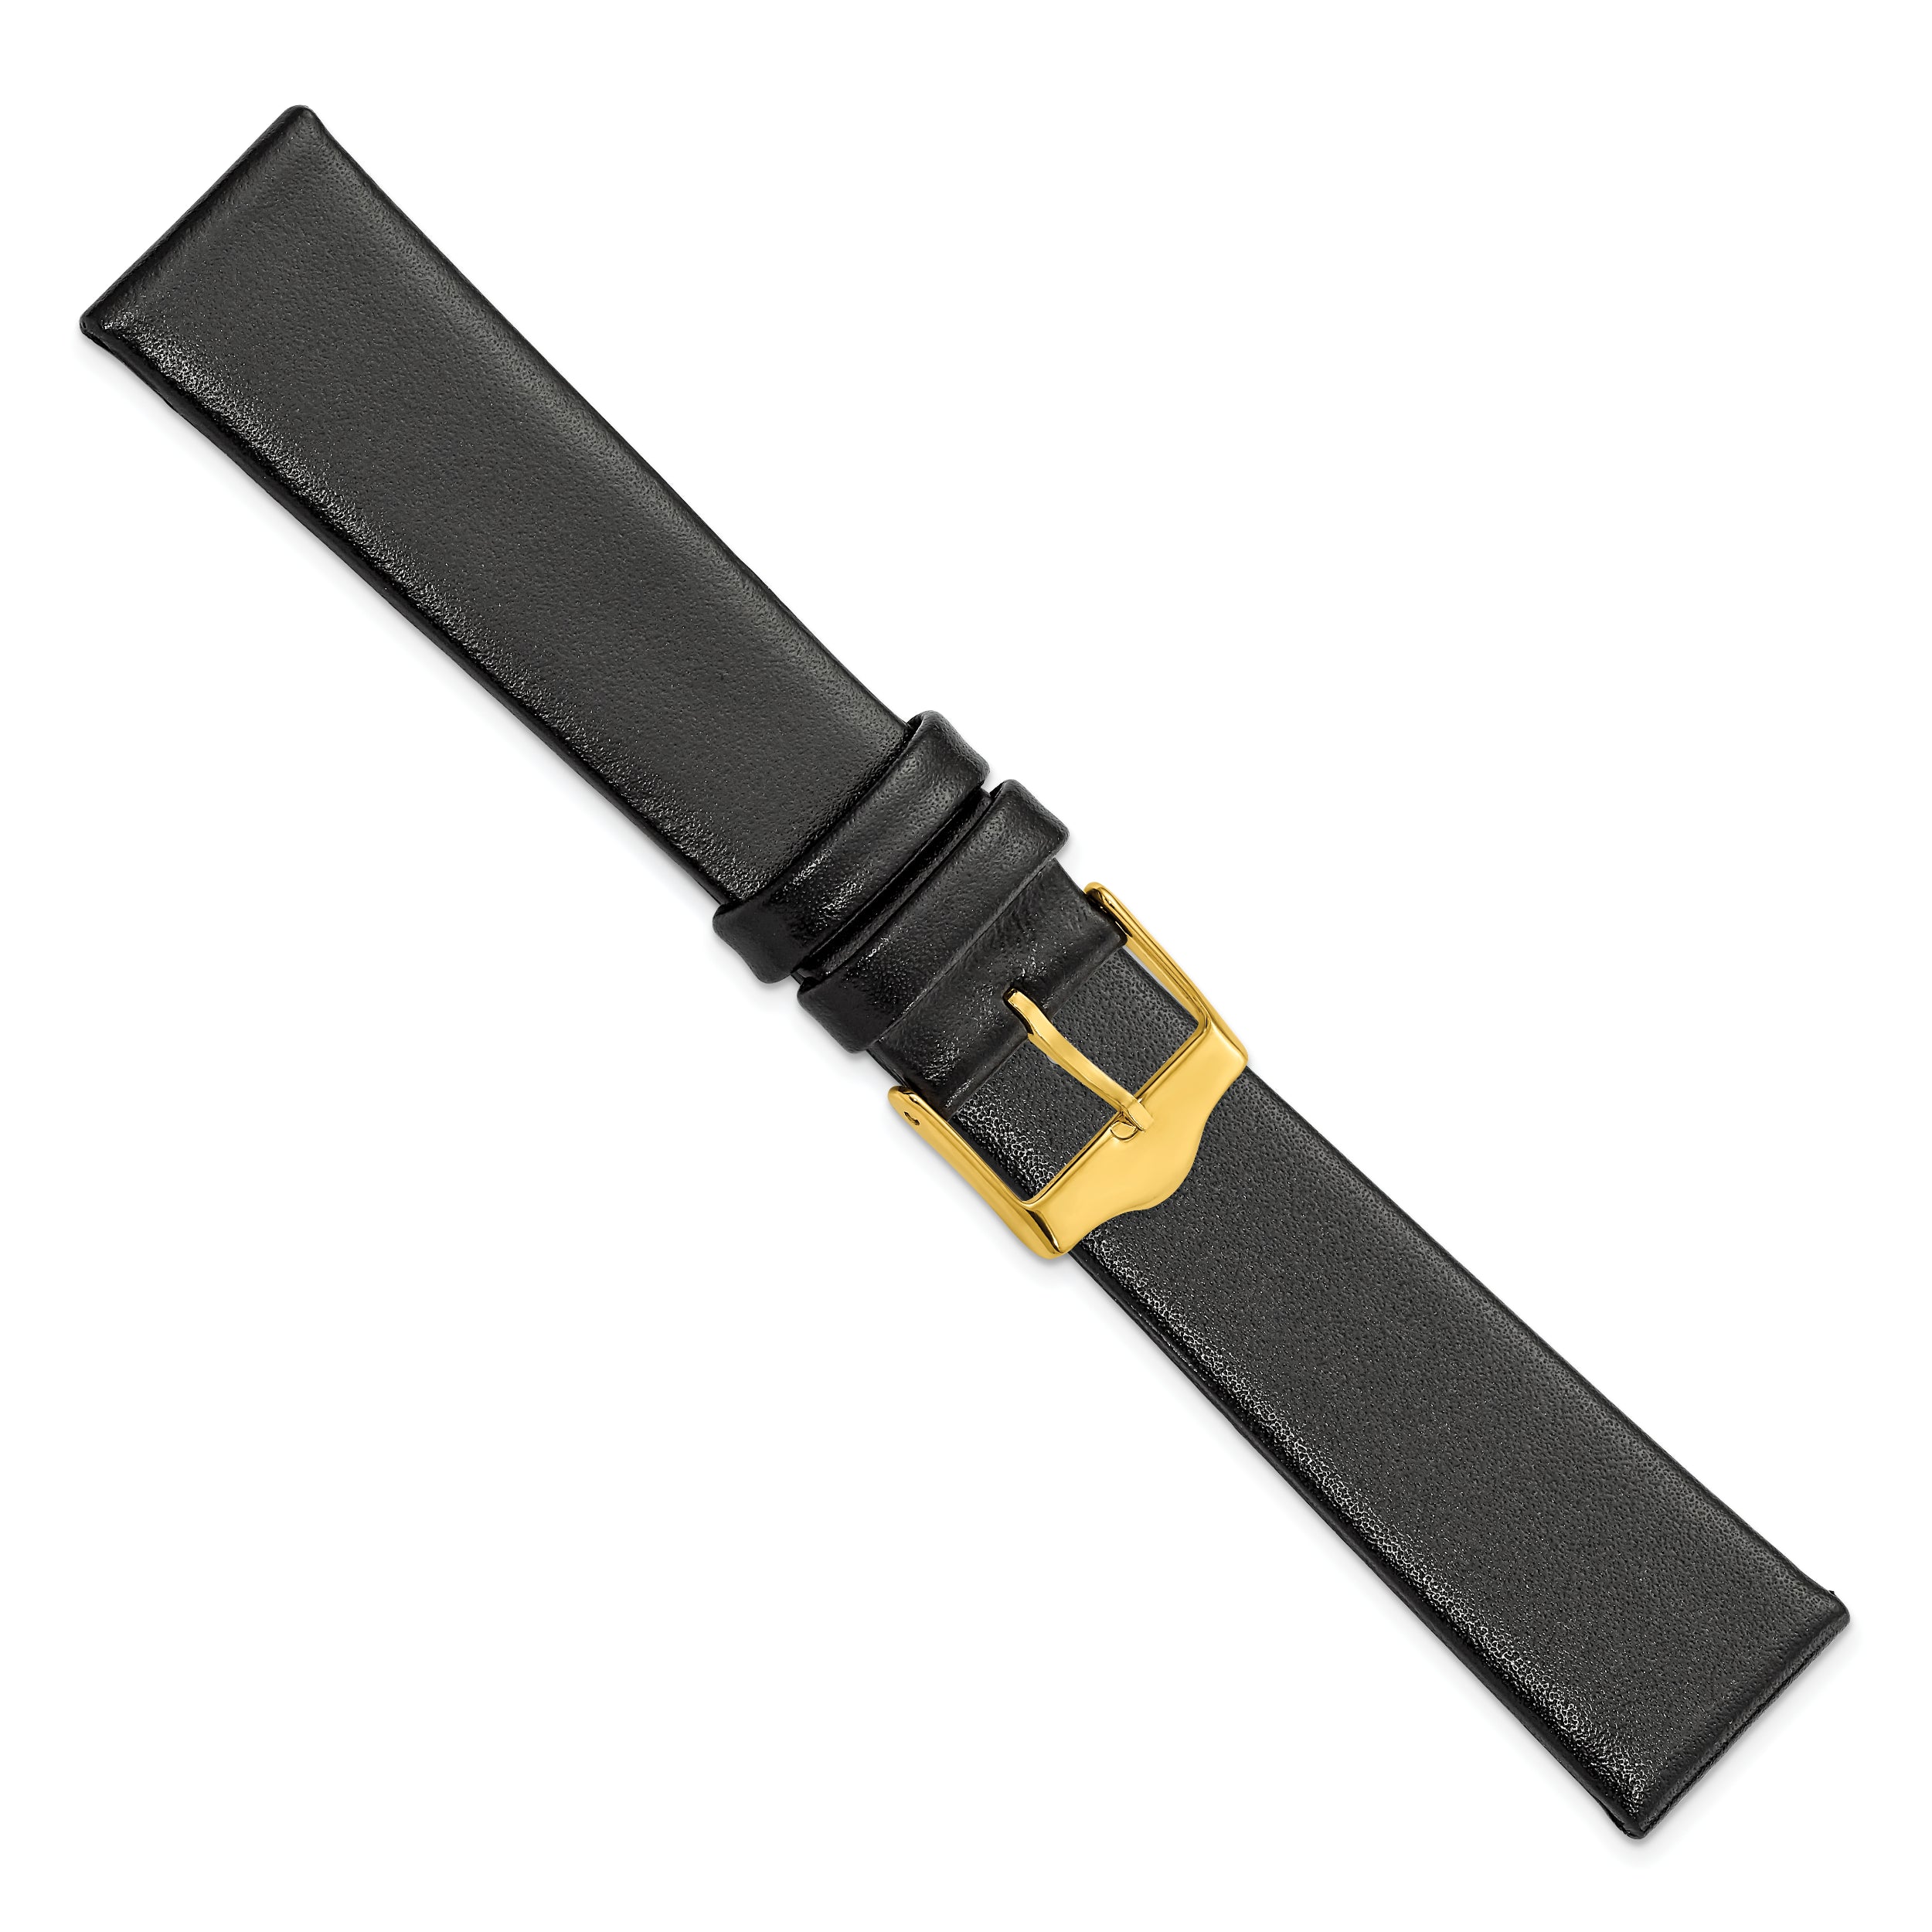 12mm Black Smooth Flat Leather with Gold-tone Buckle Watch 6.75 inch Band